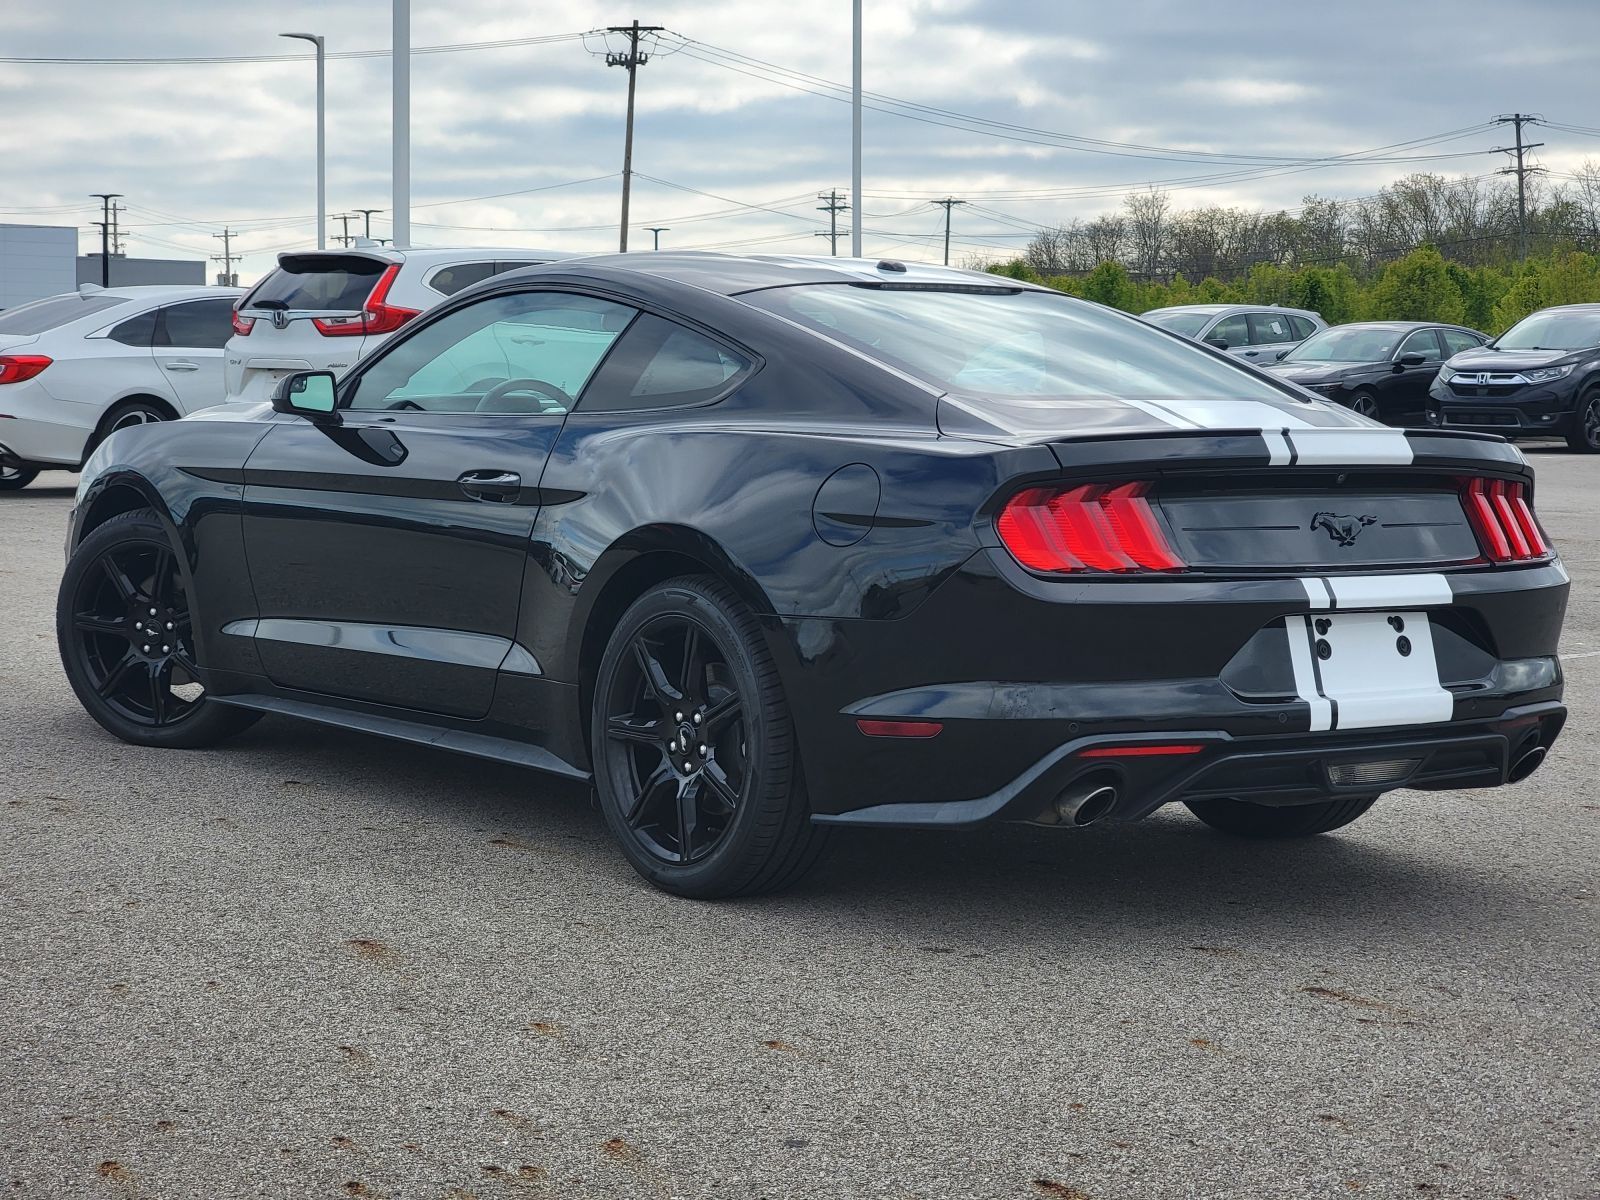 Used, 2019 Ford Mustang EcoBoost, Black, P0537-12